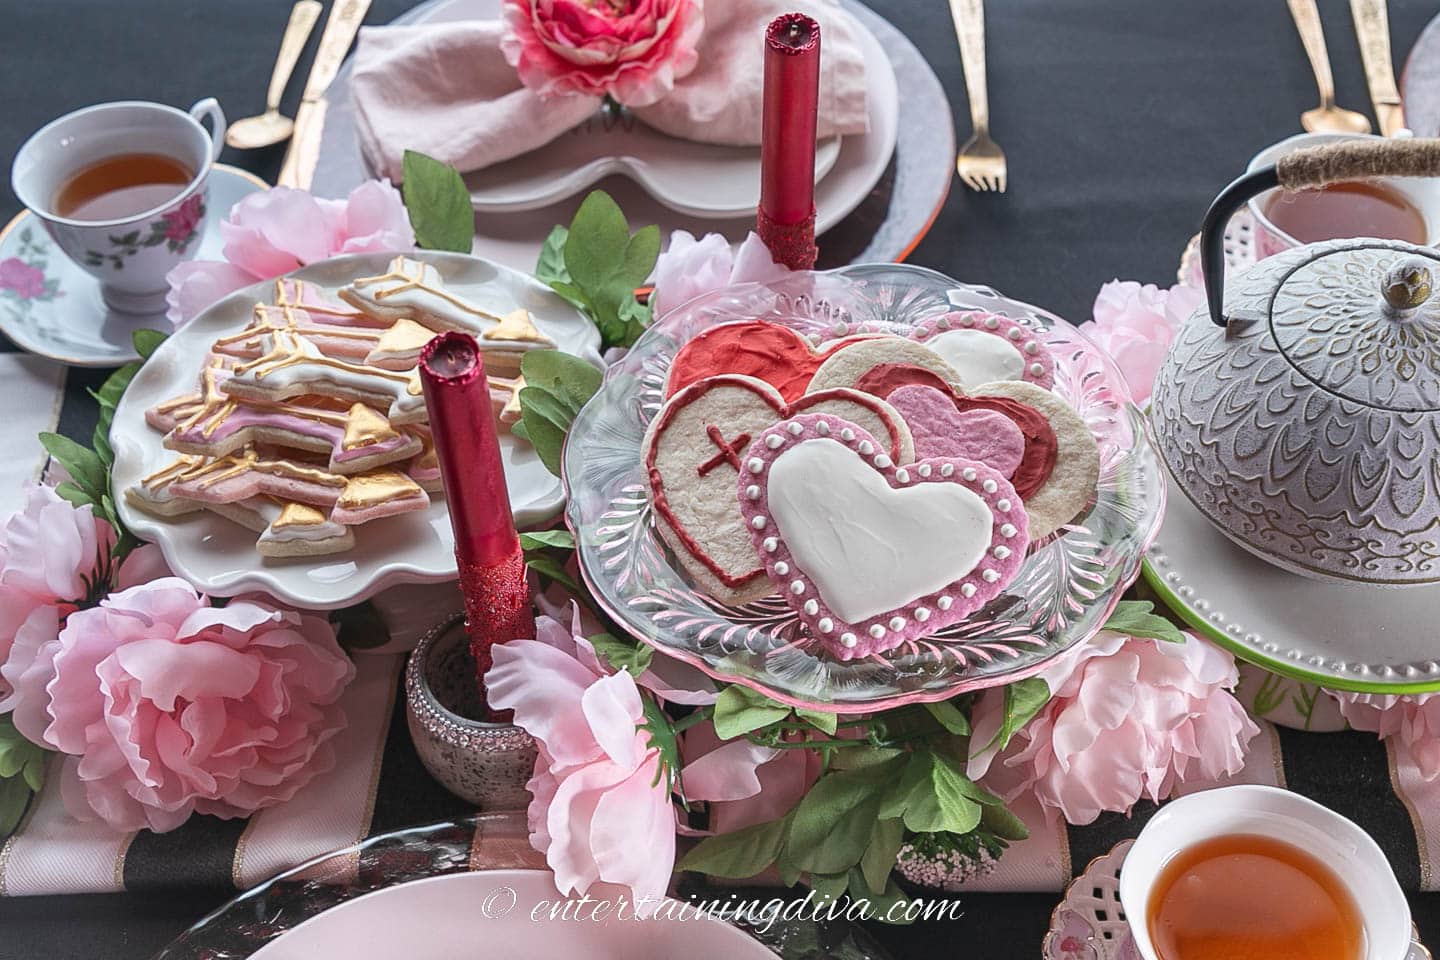 A Valentine tea party centerpiece with heart sugar cookies, candles, faux flowers and a tea pot